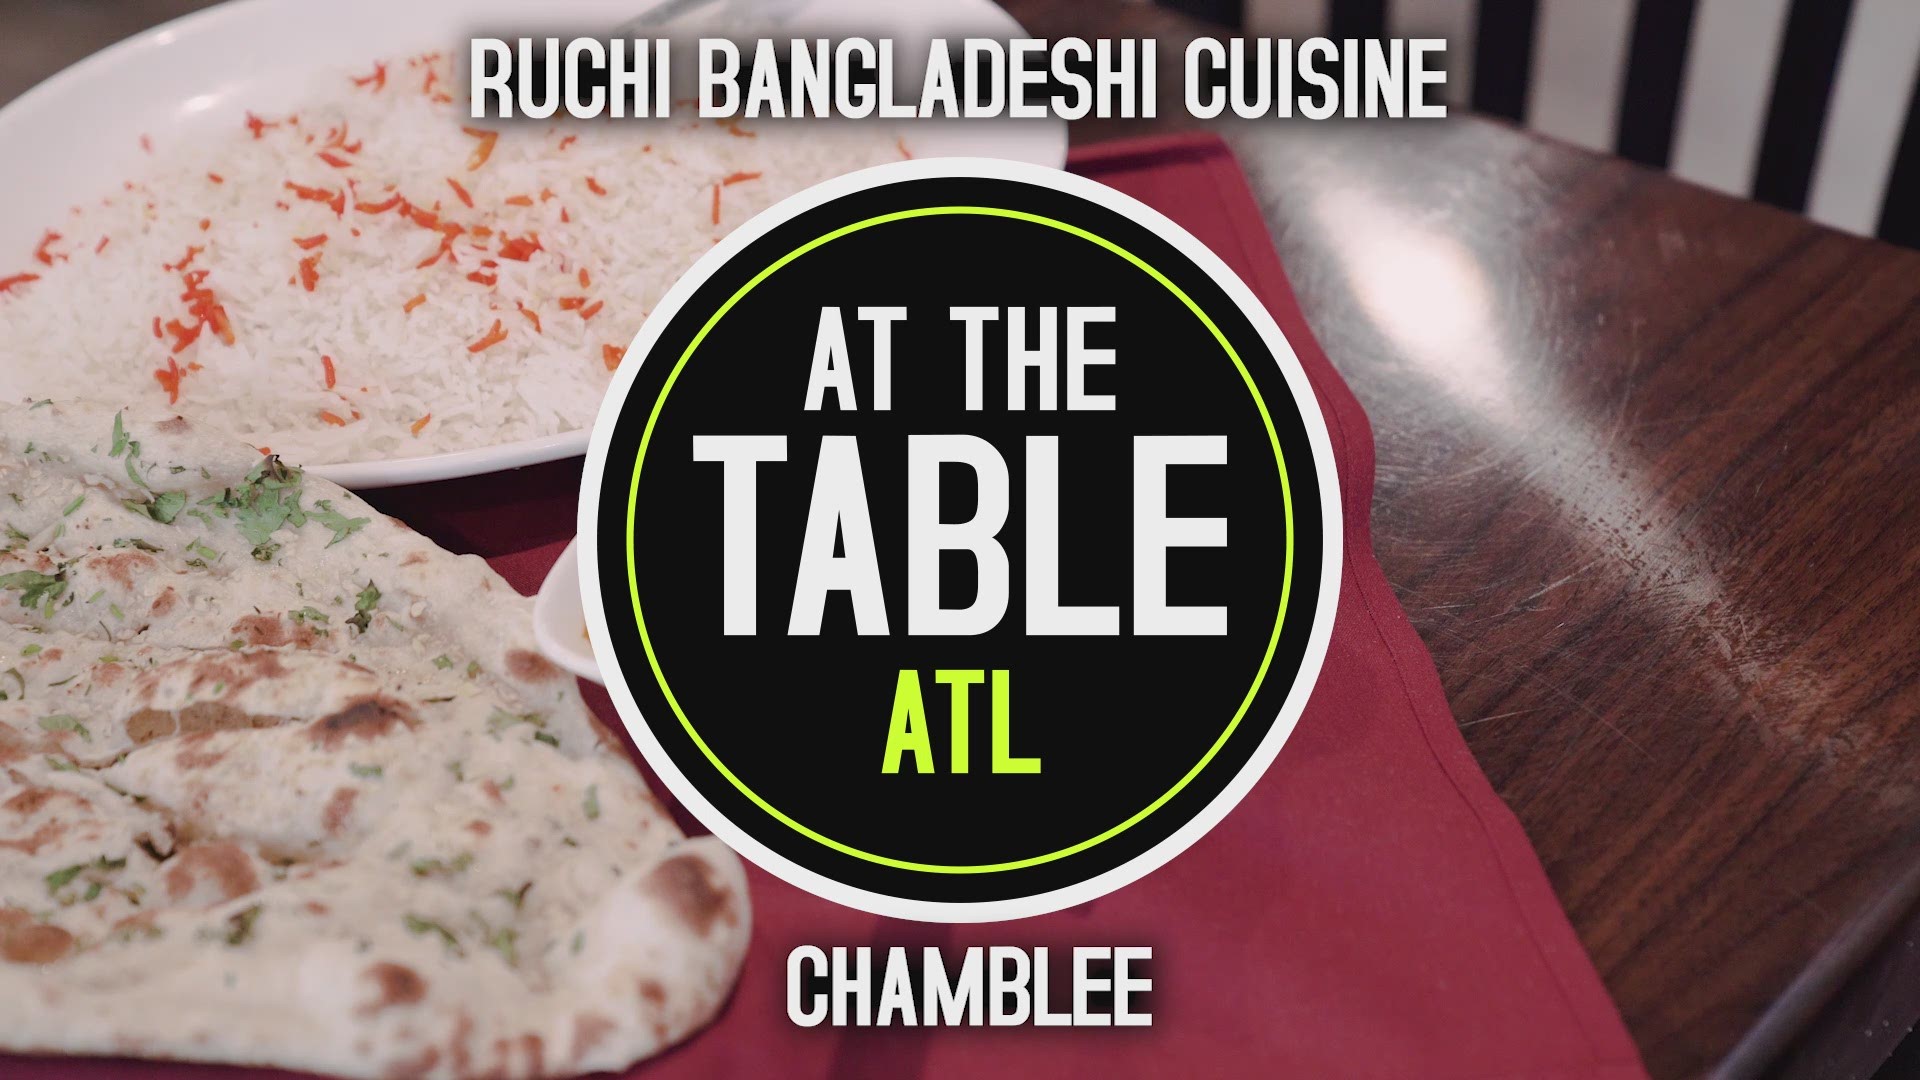 Ruchi Bangladeshi Cuisine shares the pride of Bangladeshi flavor with metro diners